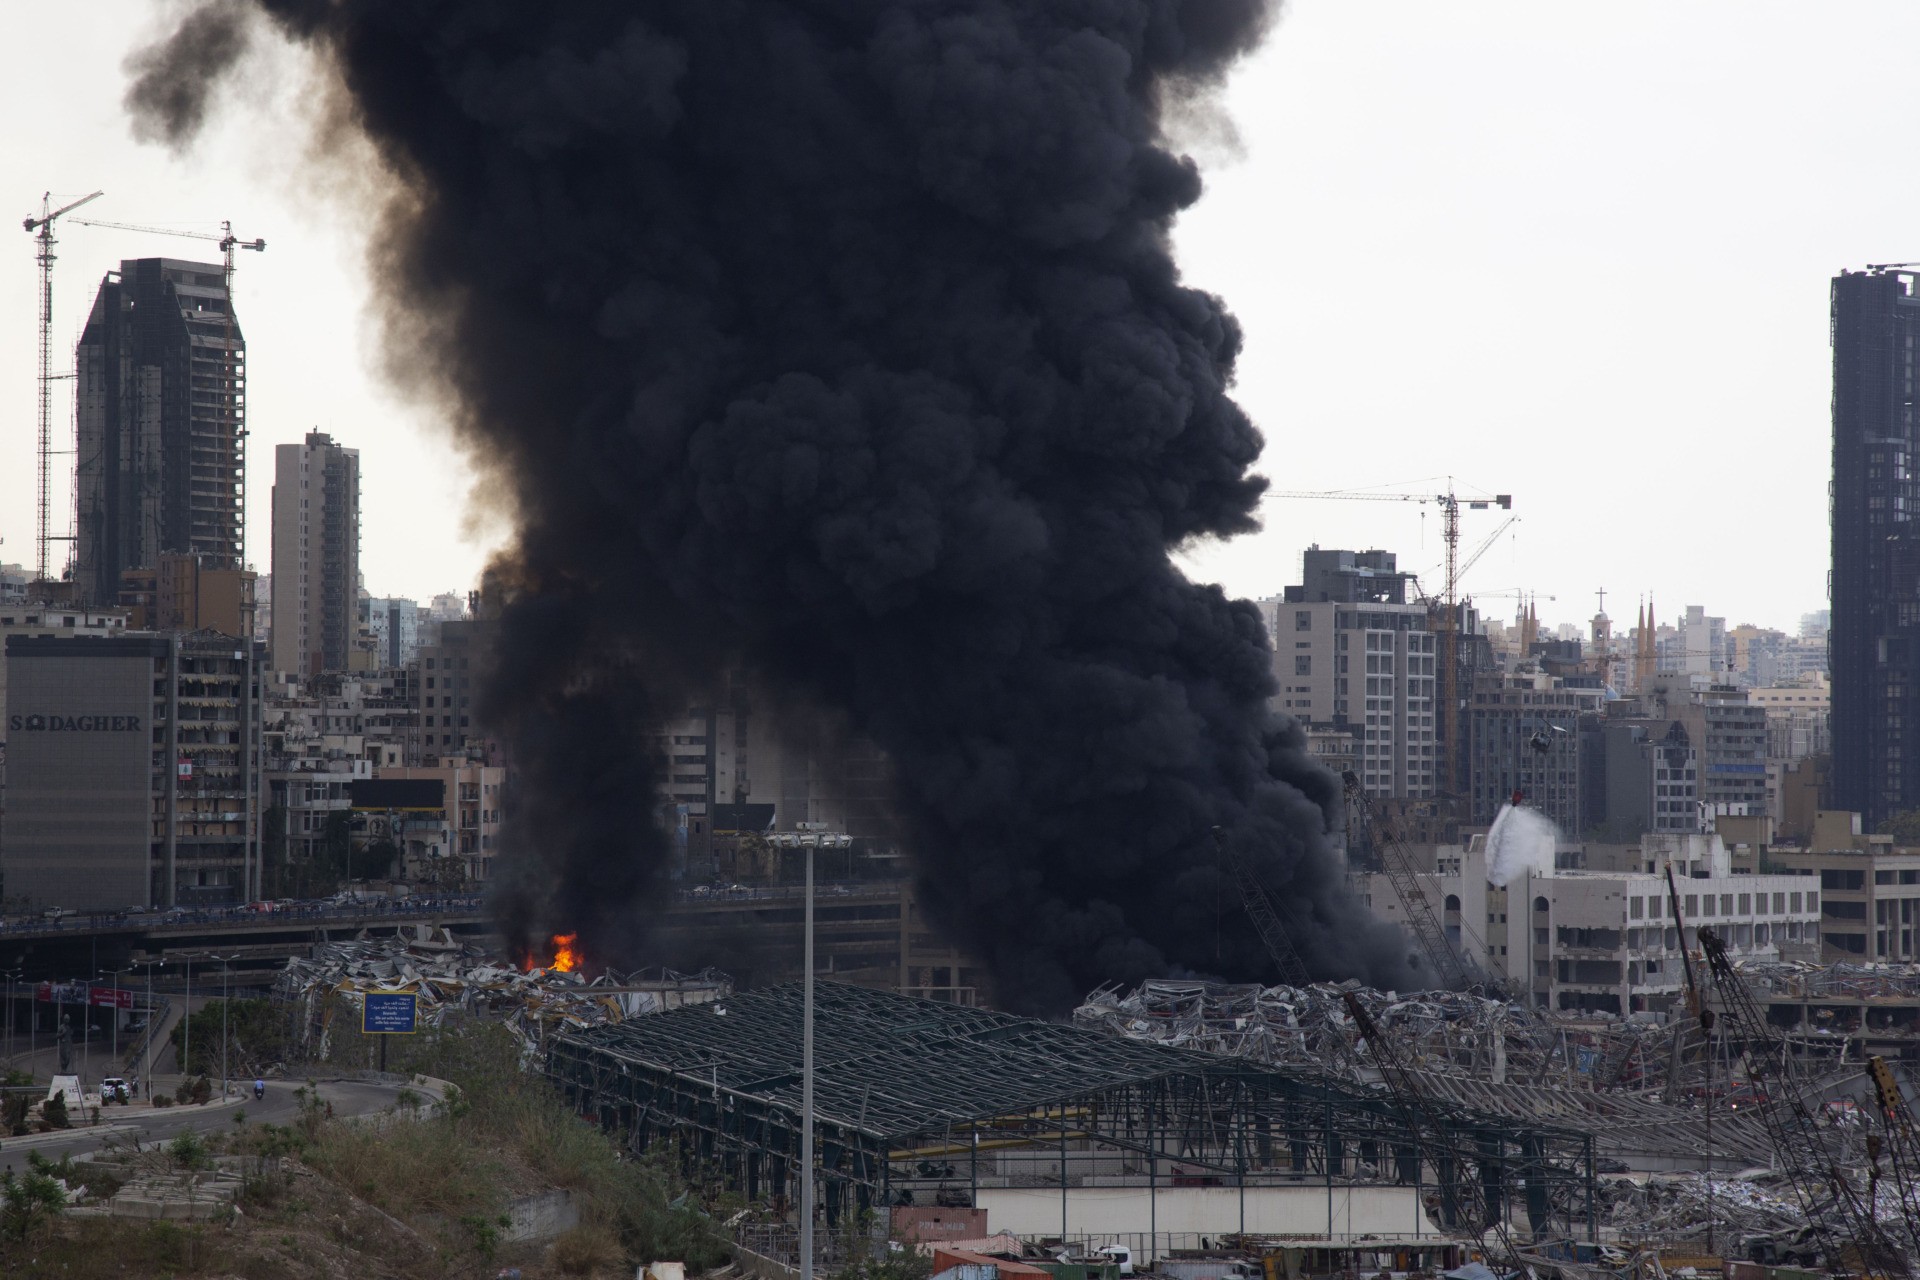 BEIRUT, LEBANON - SEPTEMBER 10: Smoke rises from a fire which has broken out at the Beirut Port on September 10, 2020 in Beirut, Lebanon. The fire broke out in a structure in the city's heavily damaged port facility, the site of last month's explosion that killed more than 190 people. (Photo by Sam Tarling/Getty Images)